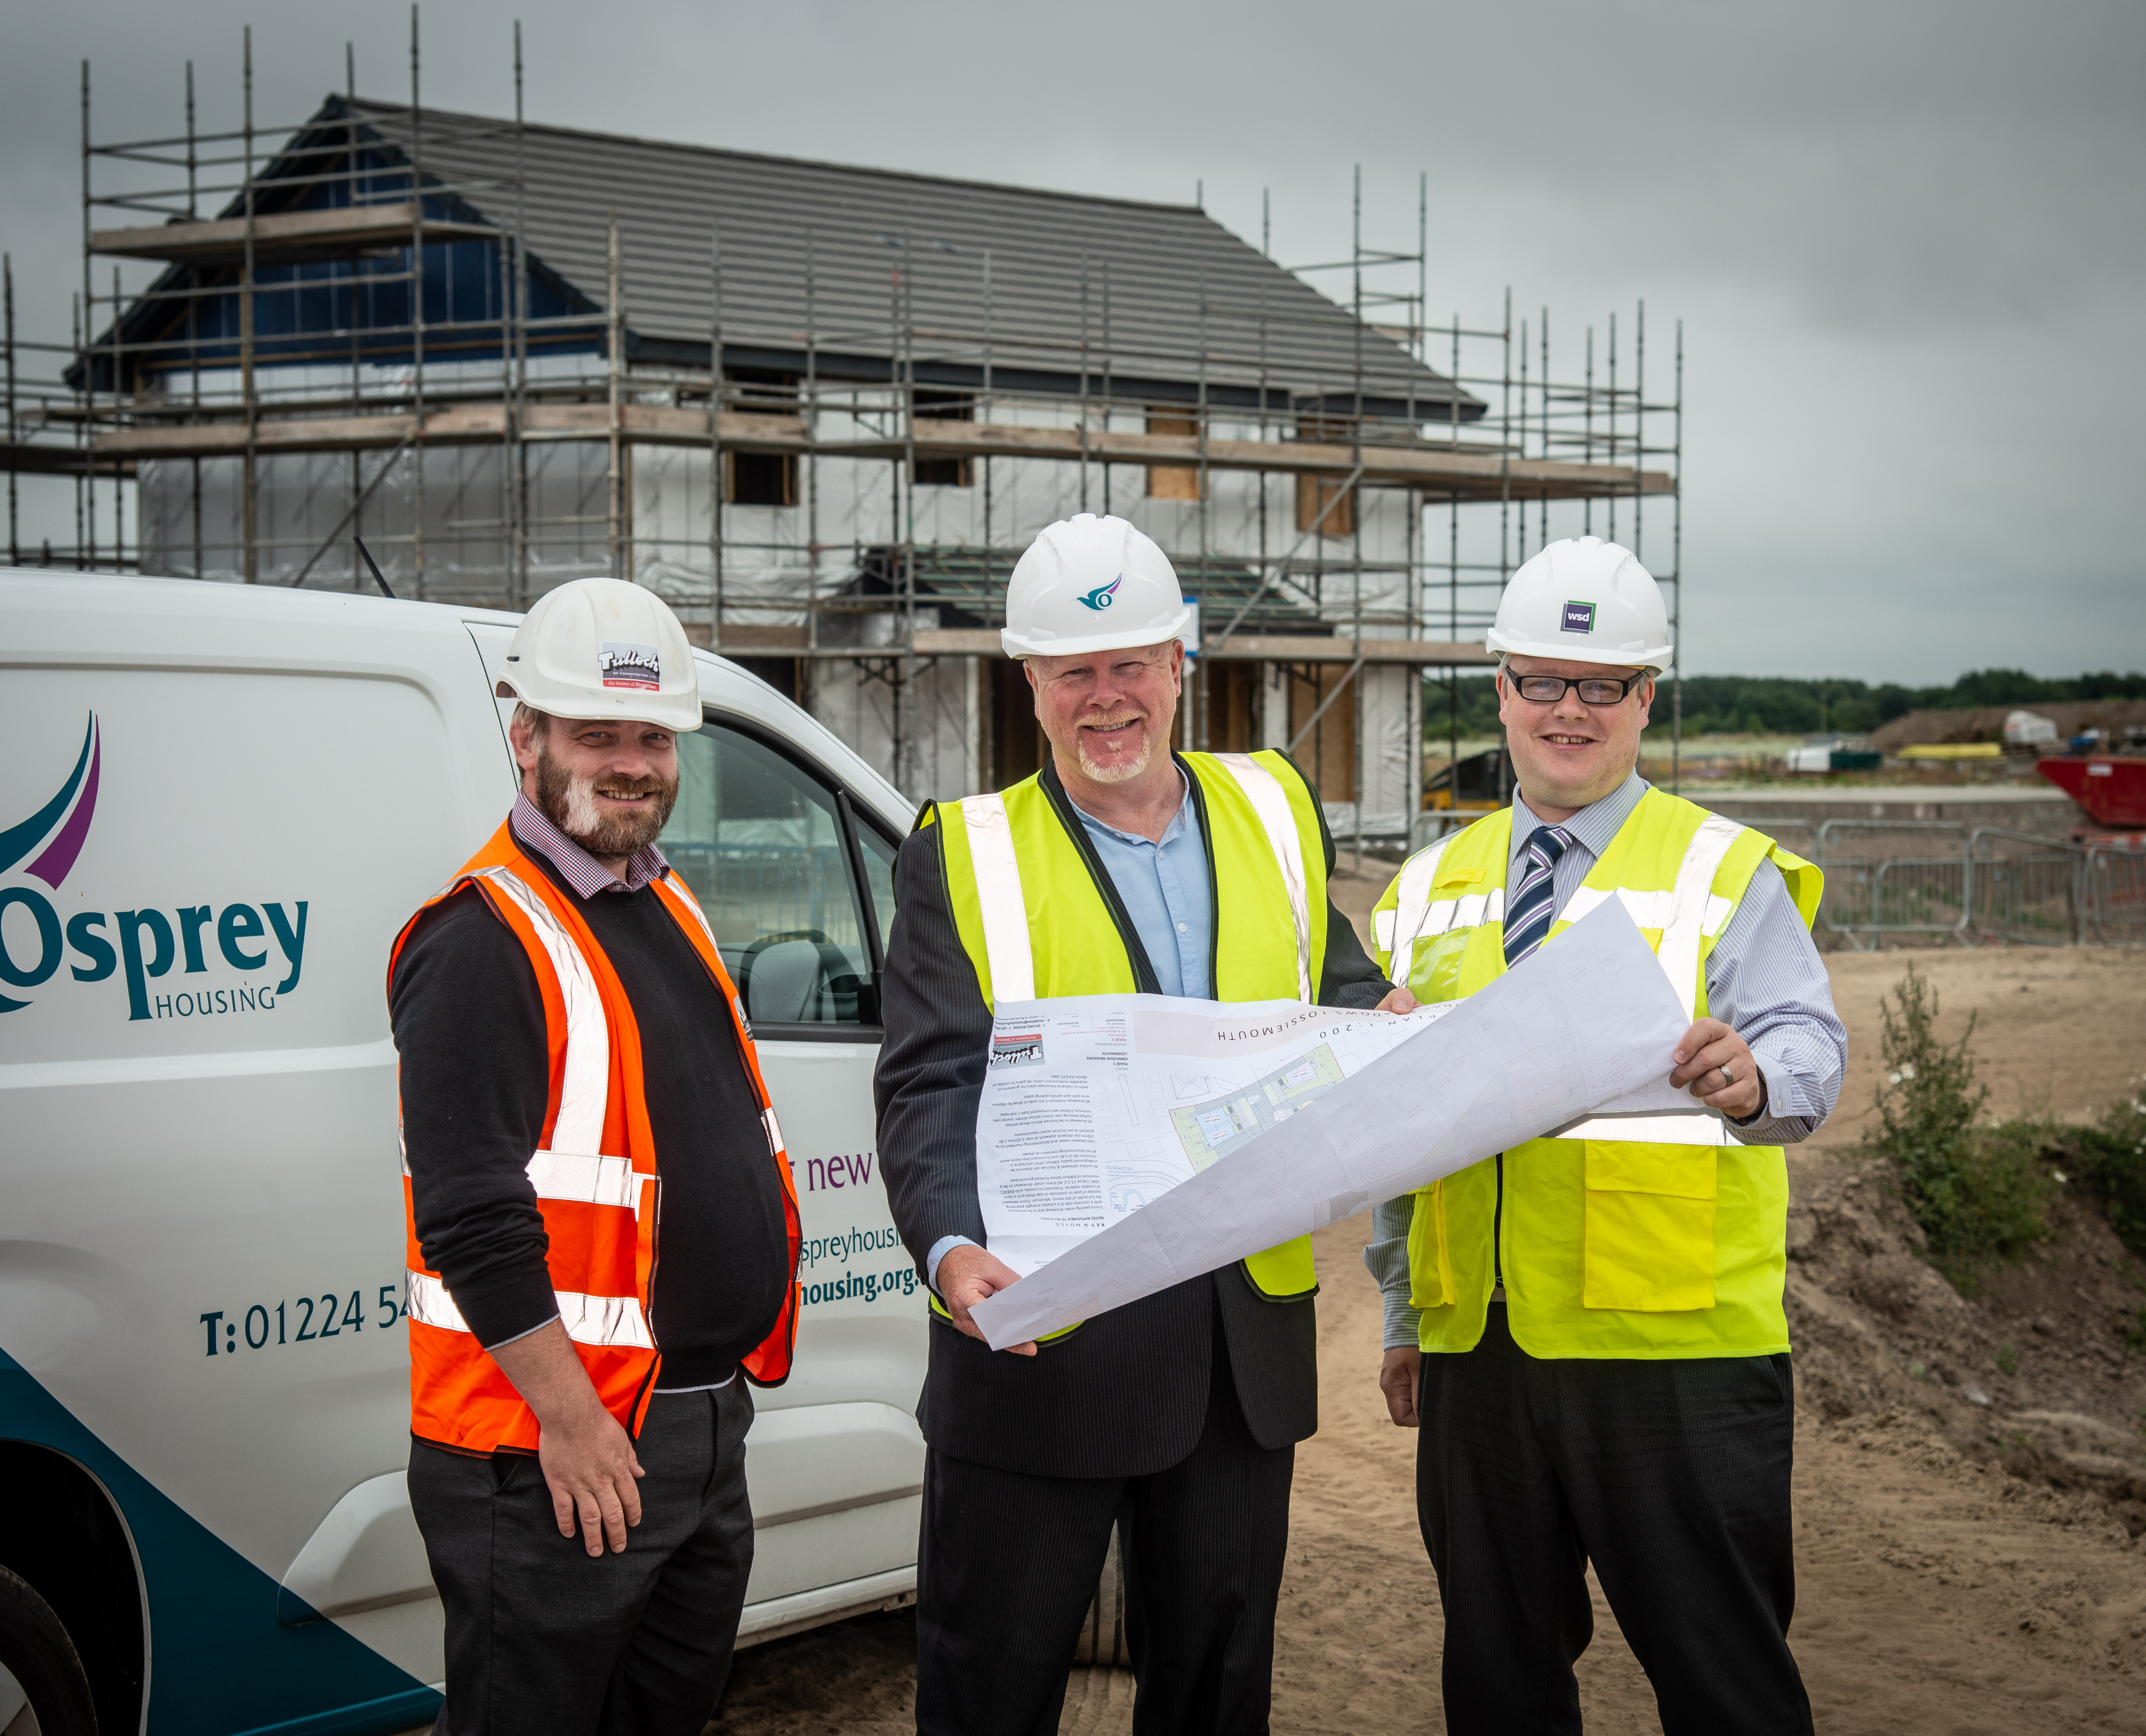 Osprey Housing invests £2.85m in major Lossiemouth new build project